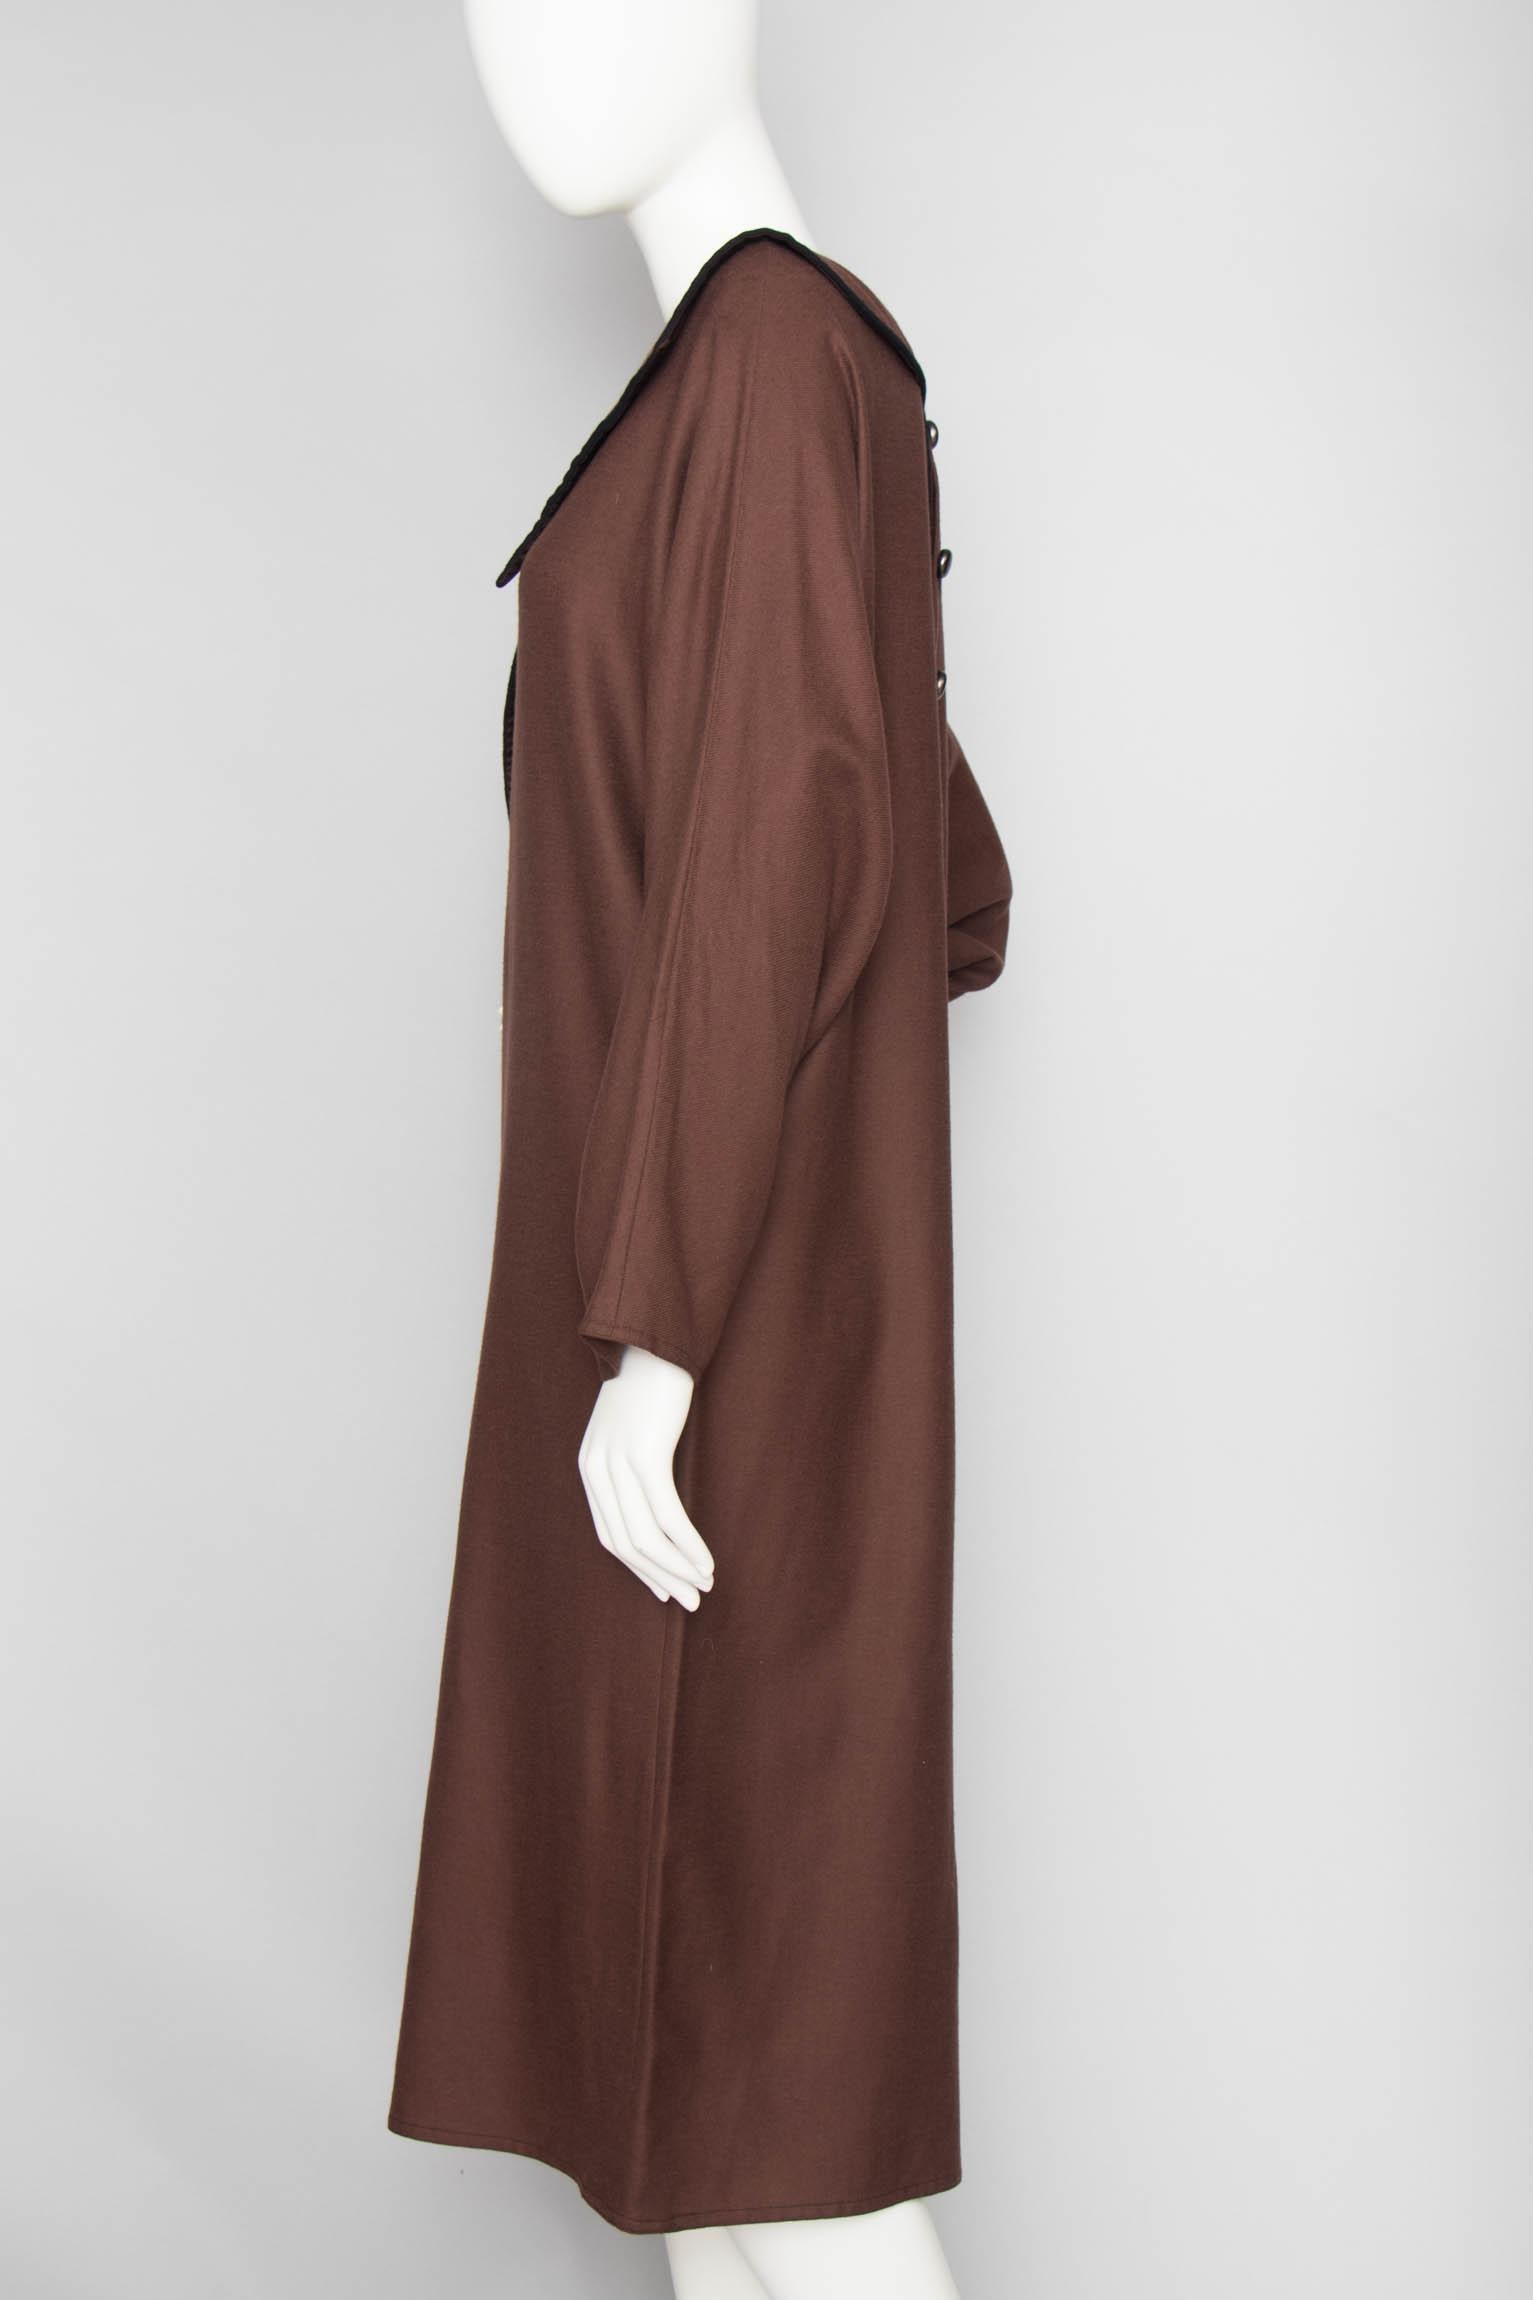 Women's or Men's Chloé Vintage Brown Wool Dress with Black Trim And Pointed Collar For Sale